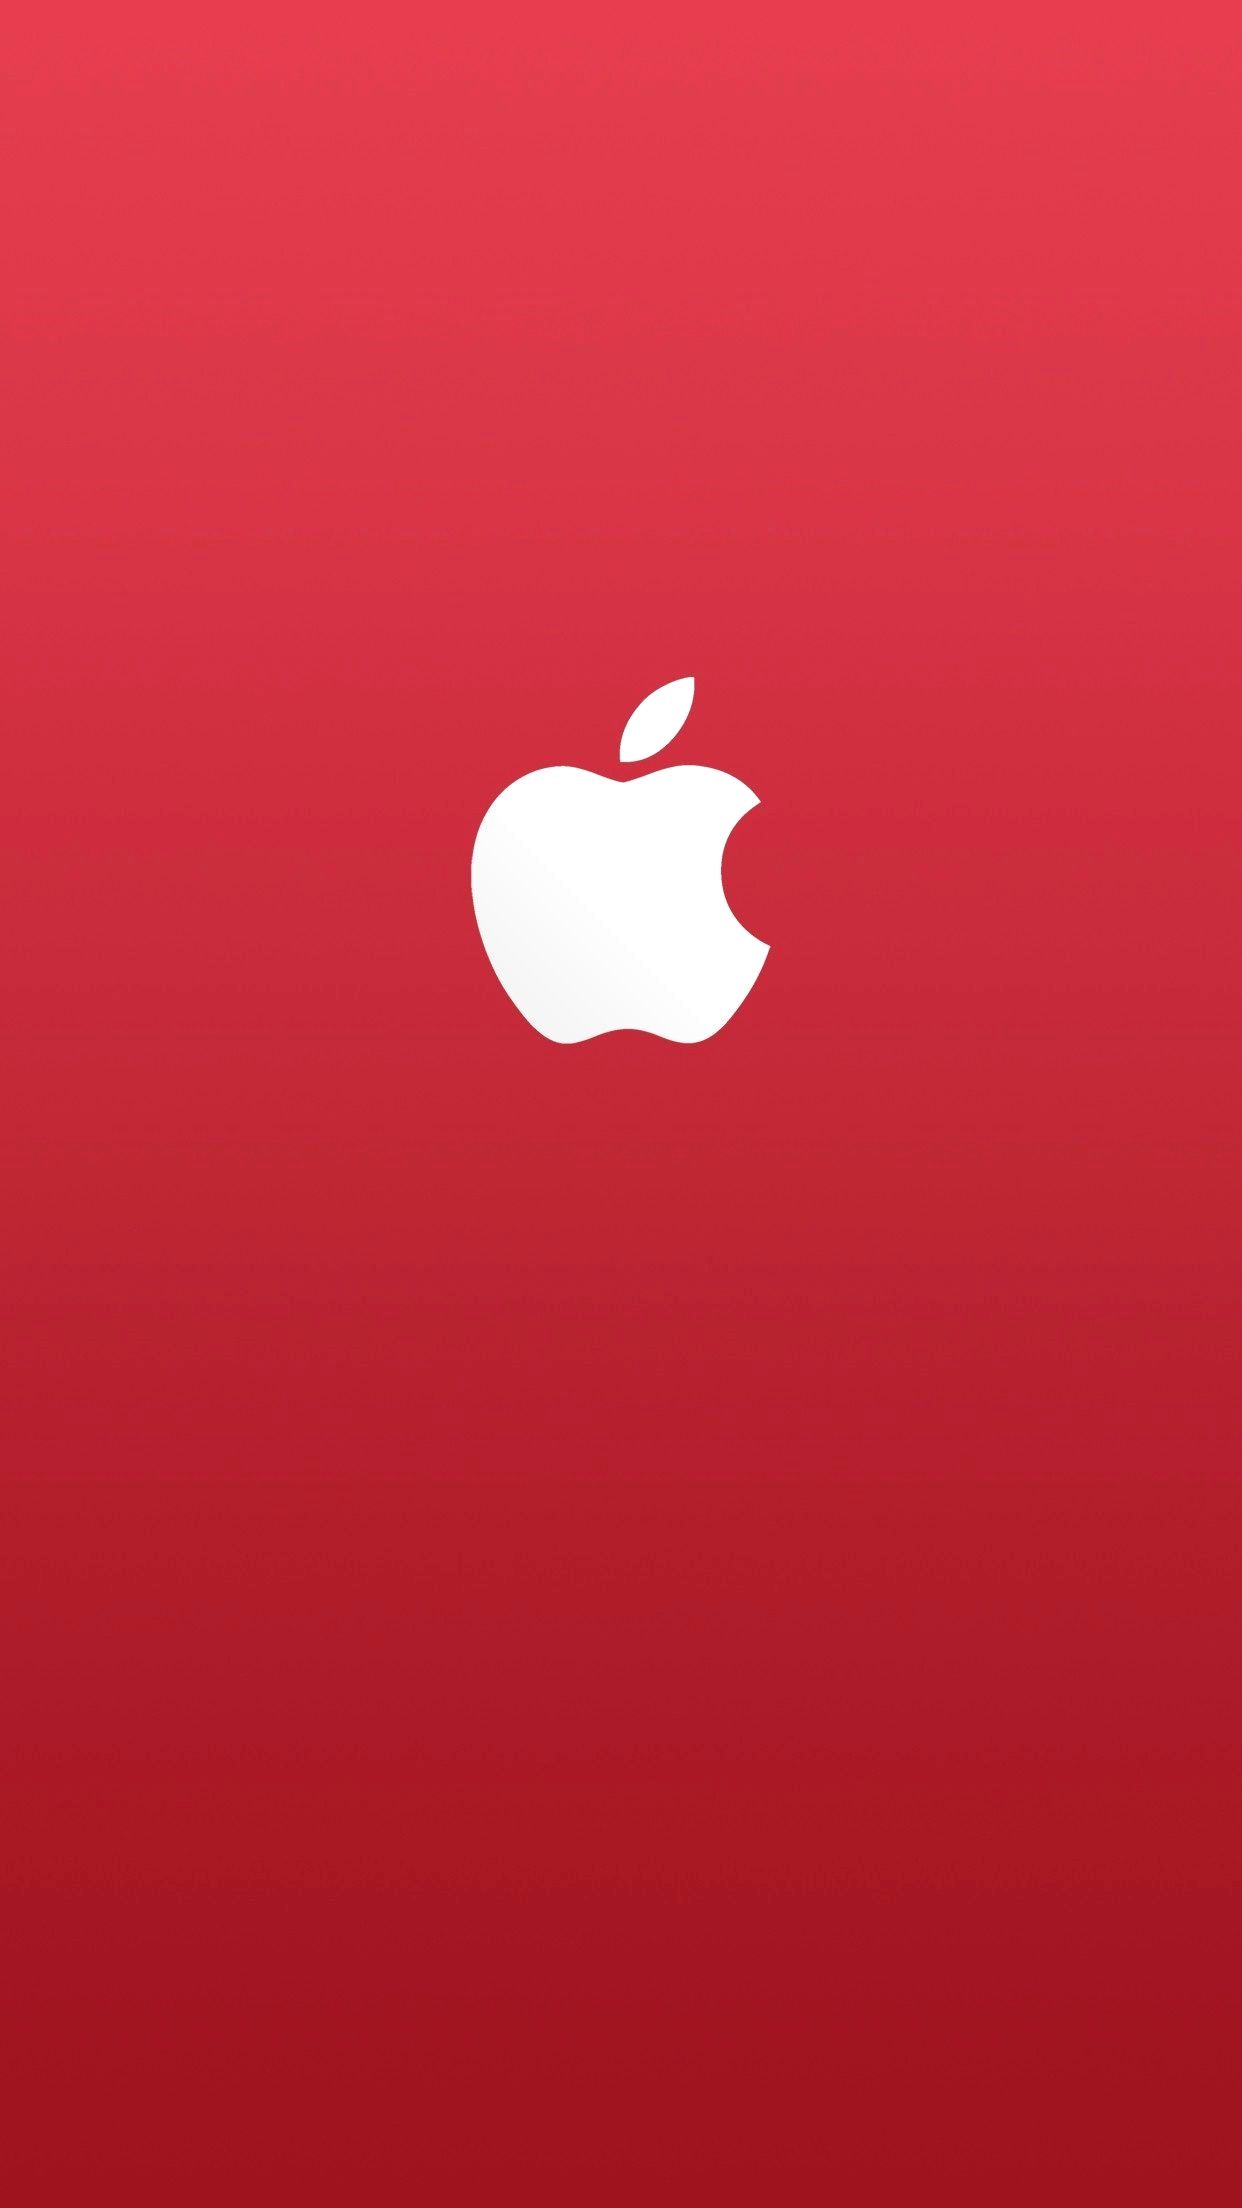 Red Wallpaper 4K iPhone X Gallery. iPhone red wallpaper, Apple logo wallpaper iphone, 4k wallpaper iphone